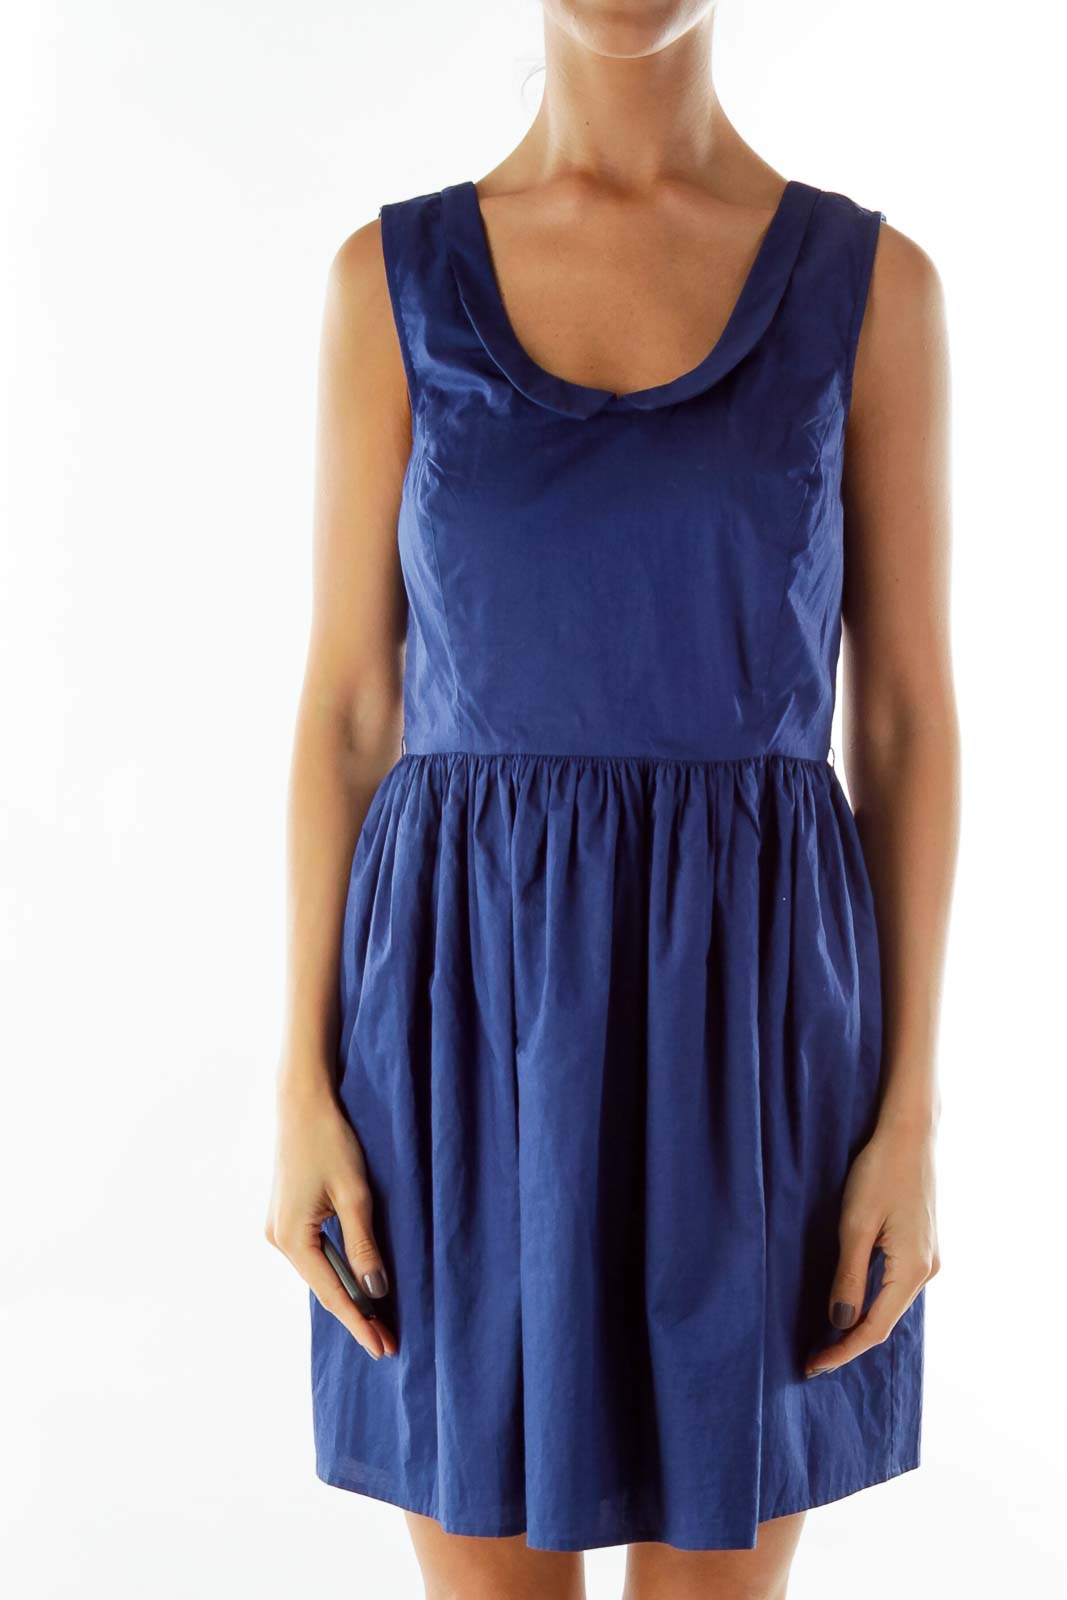 Blue Collared Flared Sleeveless Dress Front